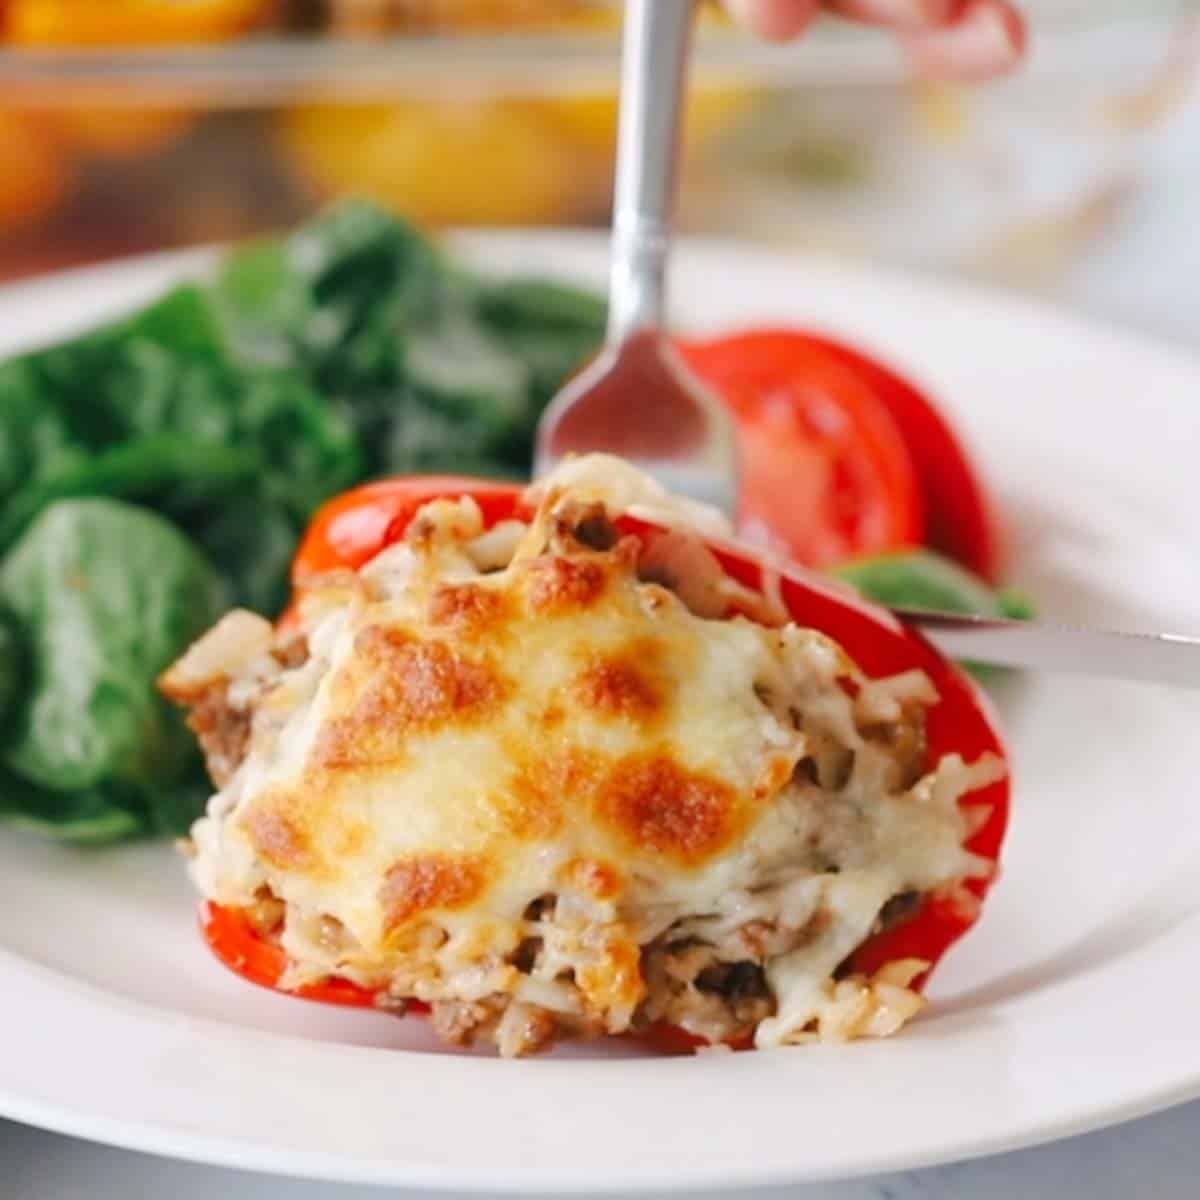 stuffed peppers recipe easy. ground beef stuffed bell peppers recipe.